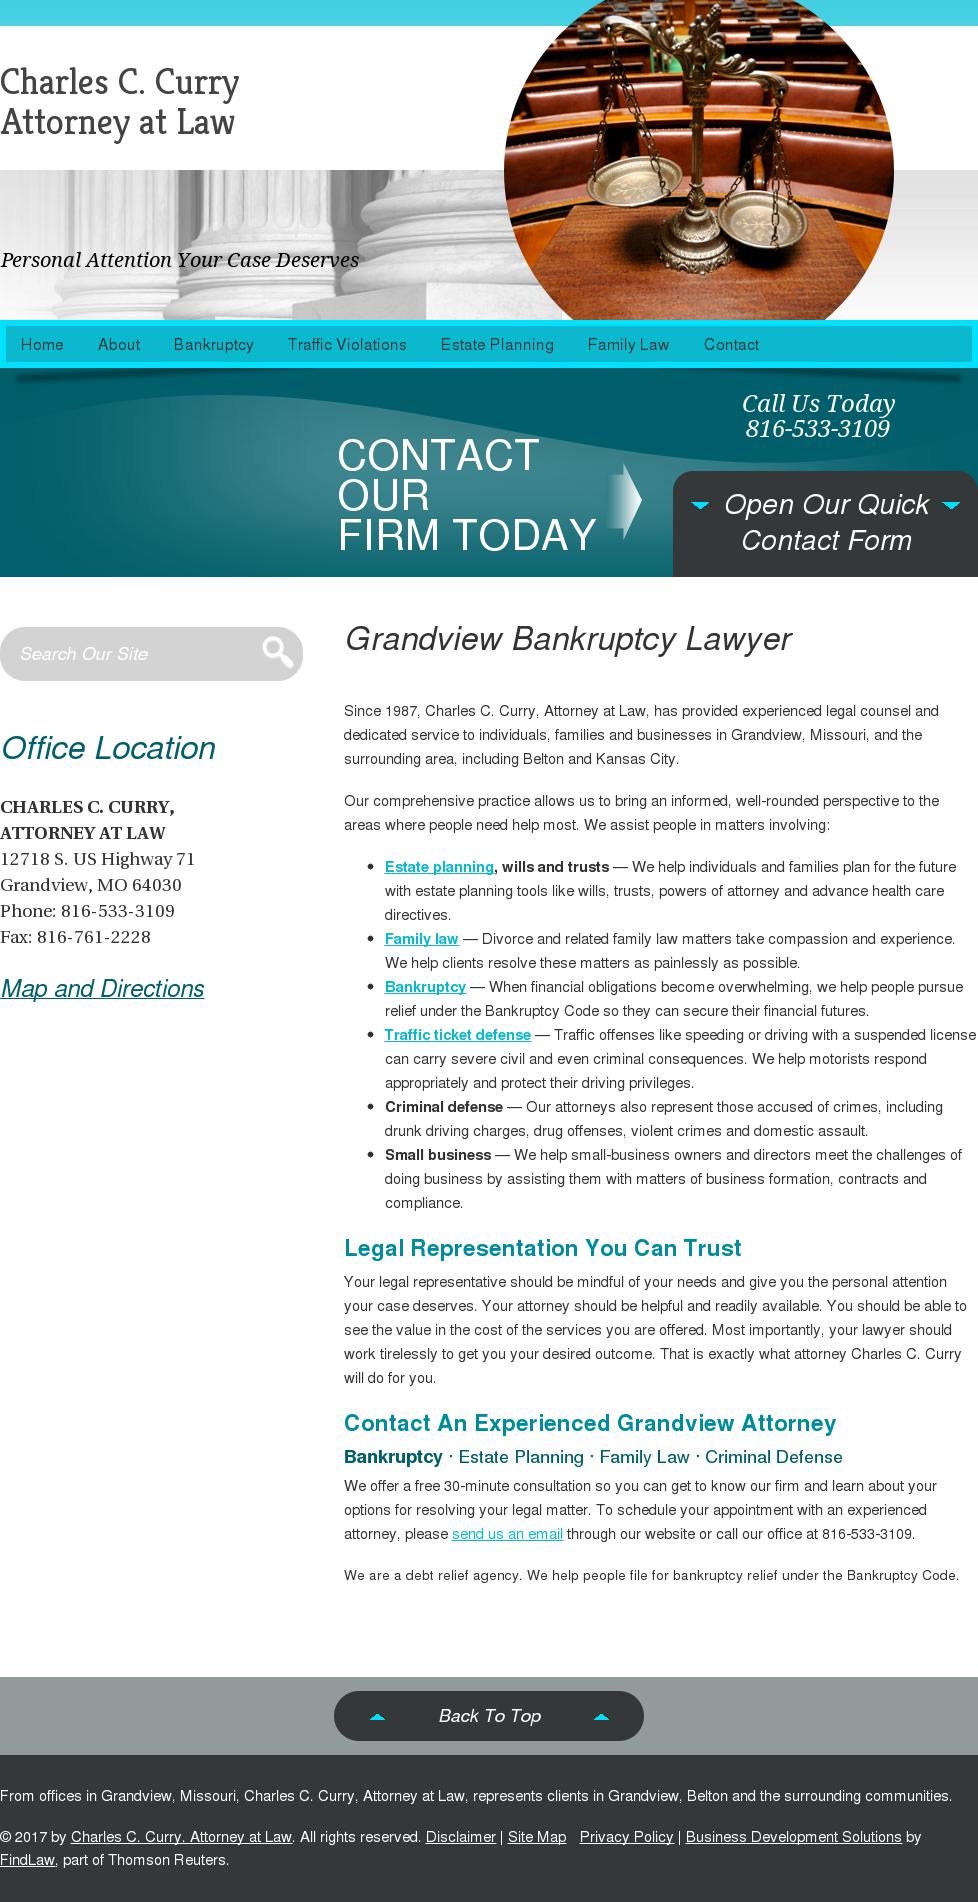 Charles C. Curry, Attorney at Law - Grandview MO Lawyers